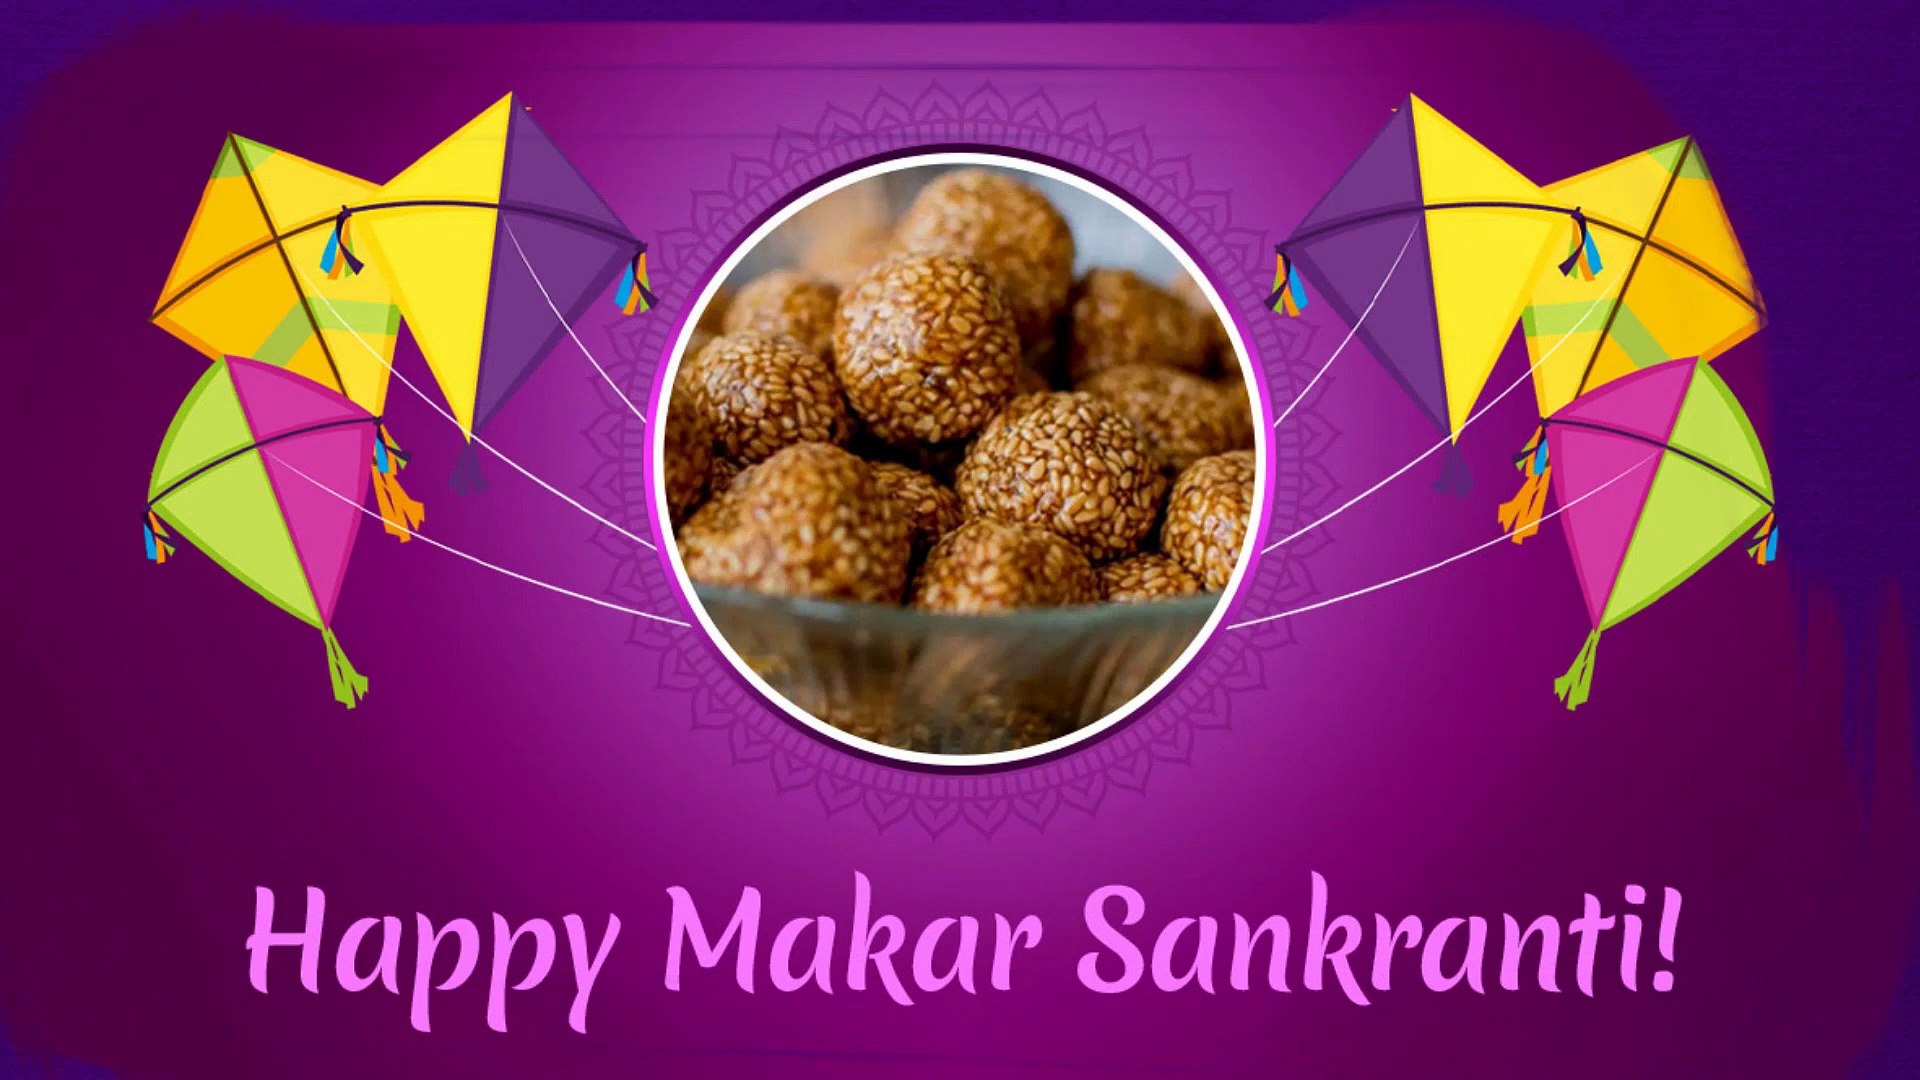 Makar Sankranti 2020 Wishes: WhatsApp Messages, Greetings & Quotes To Send  On Harvest Festival - video Dailymotion